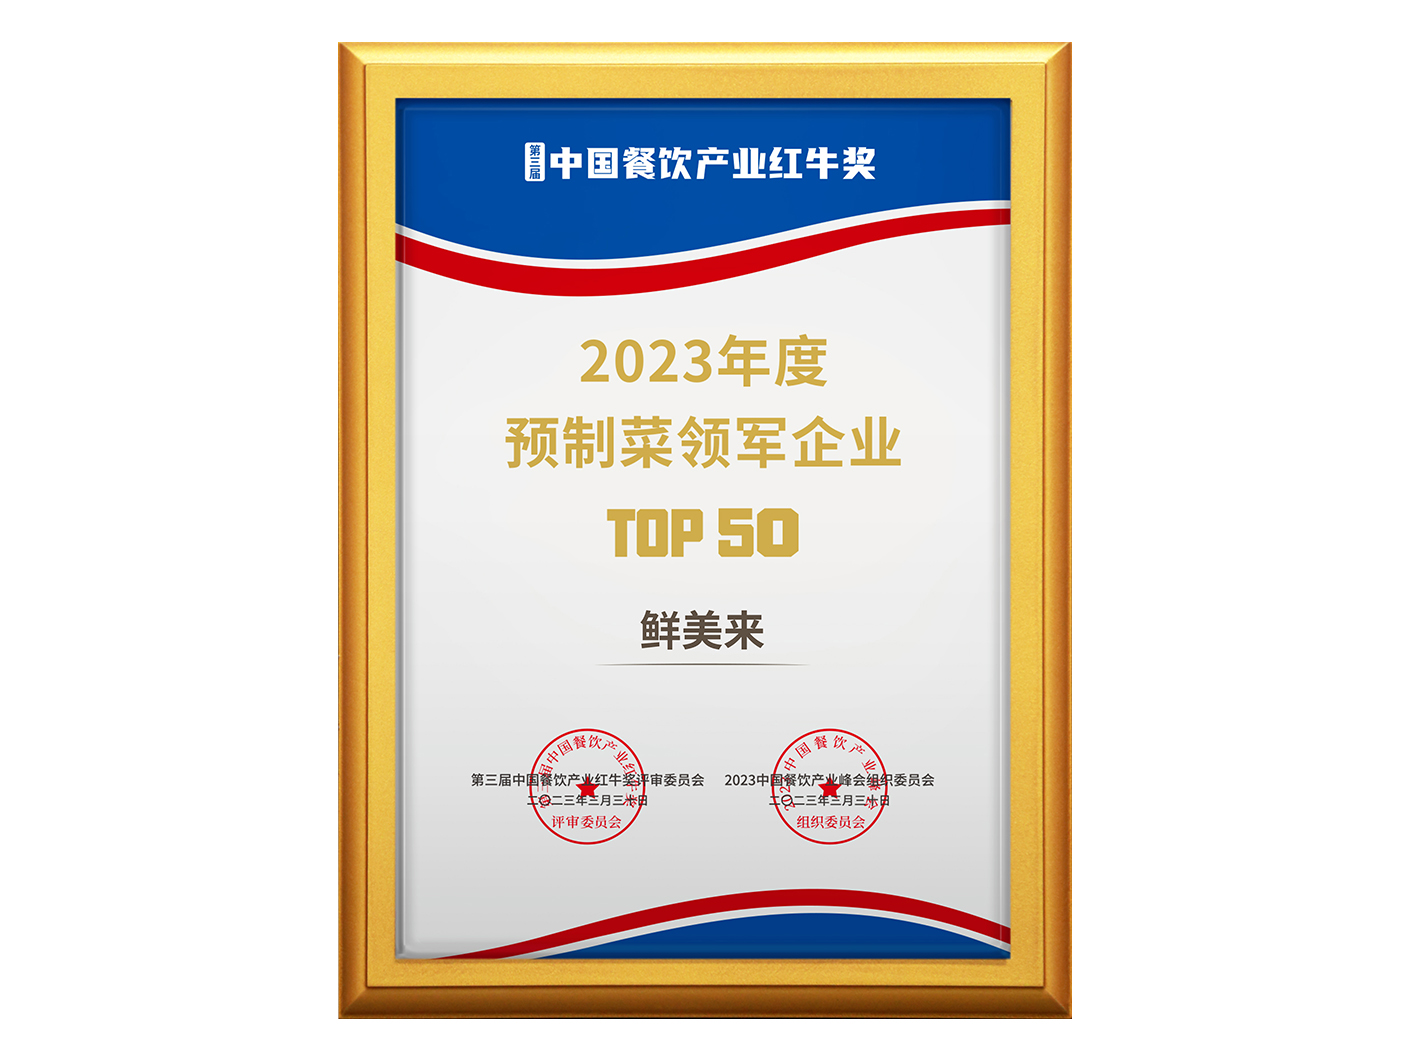 the Red Bull Award of Chinese Catering Industry Top 50 of the Leading Pre-made Food Enterprises 2023